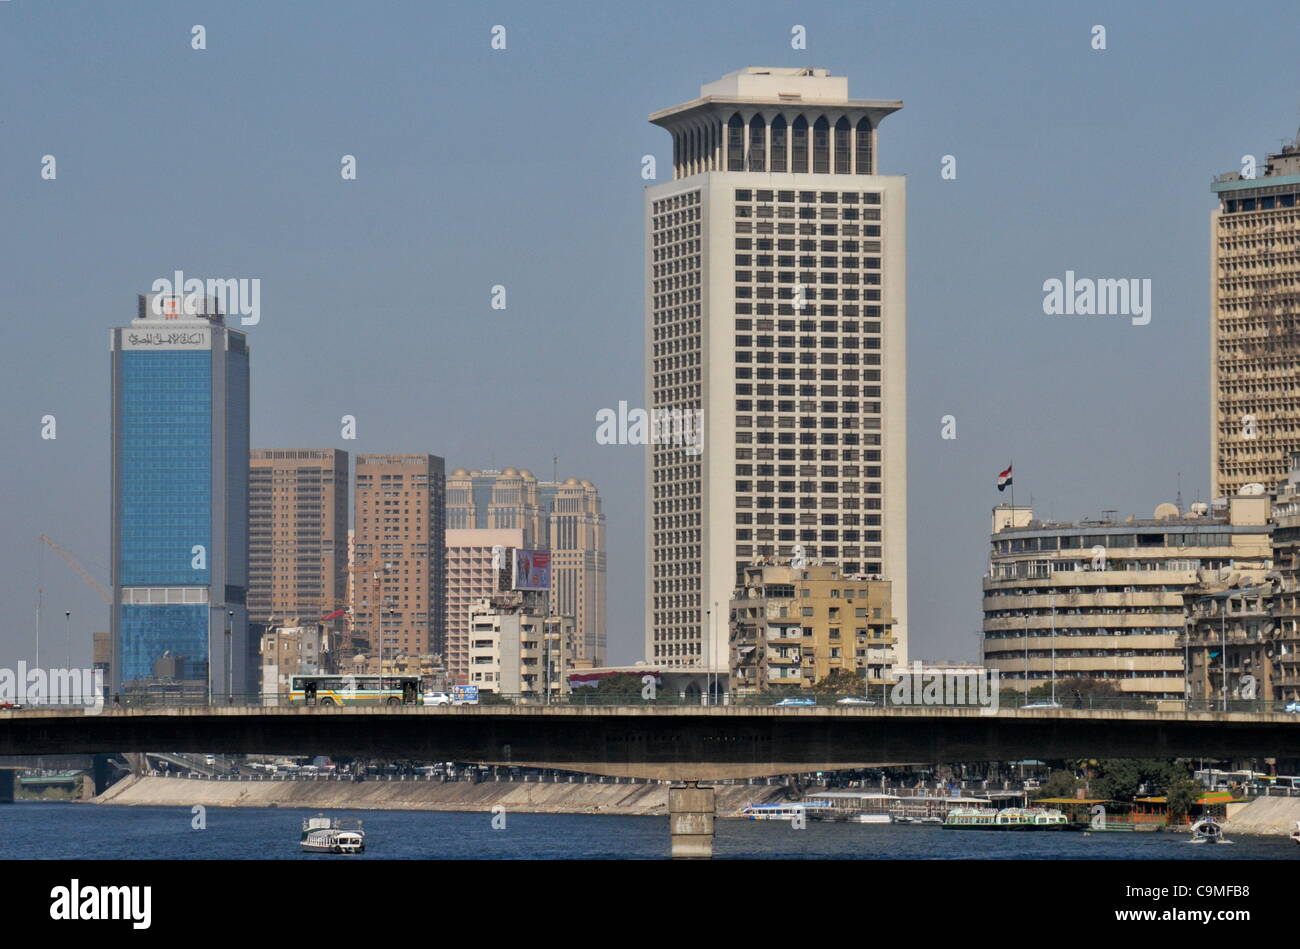 The skyline of central Cairo on the Nile River near Cairo's famous Tahrir (Liberation) Square on the first anniversary of the revolution that ousted former strongman President Hosni Mubarak. Stock Photo